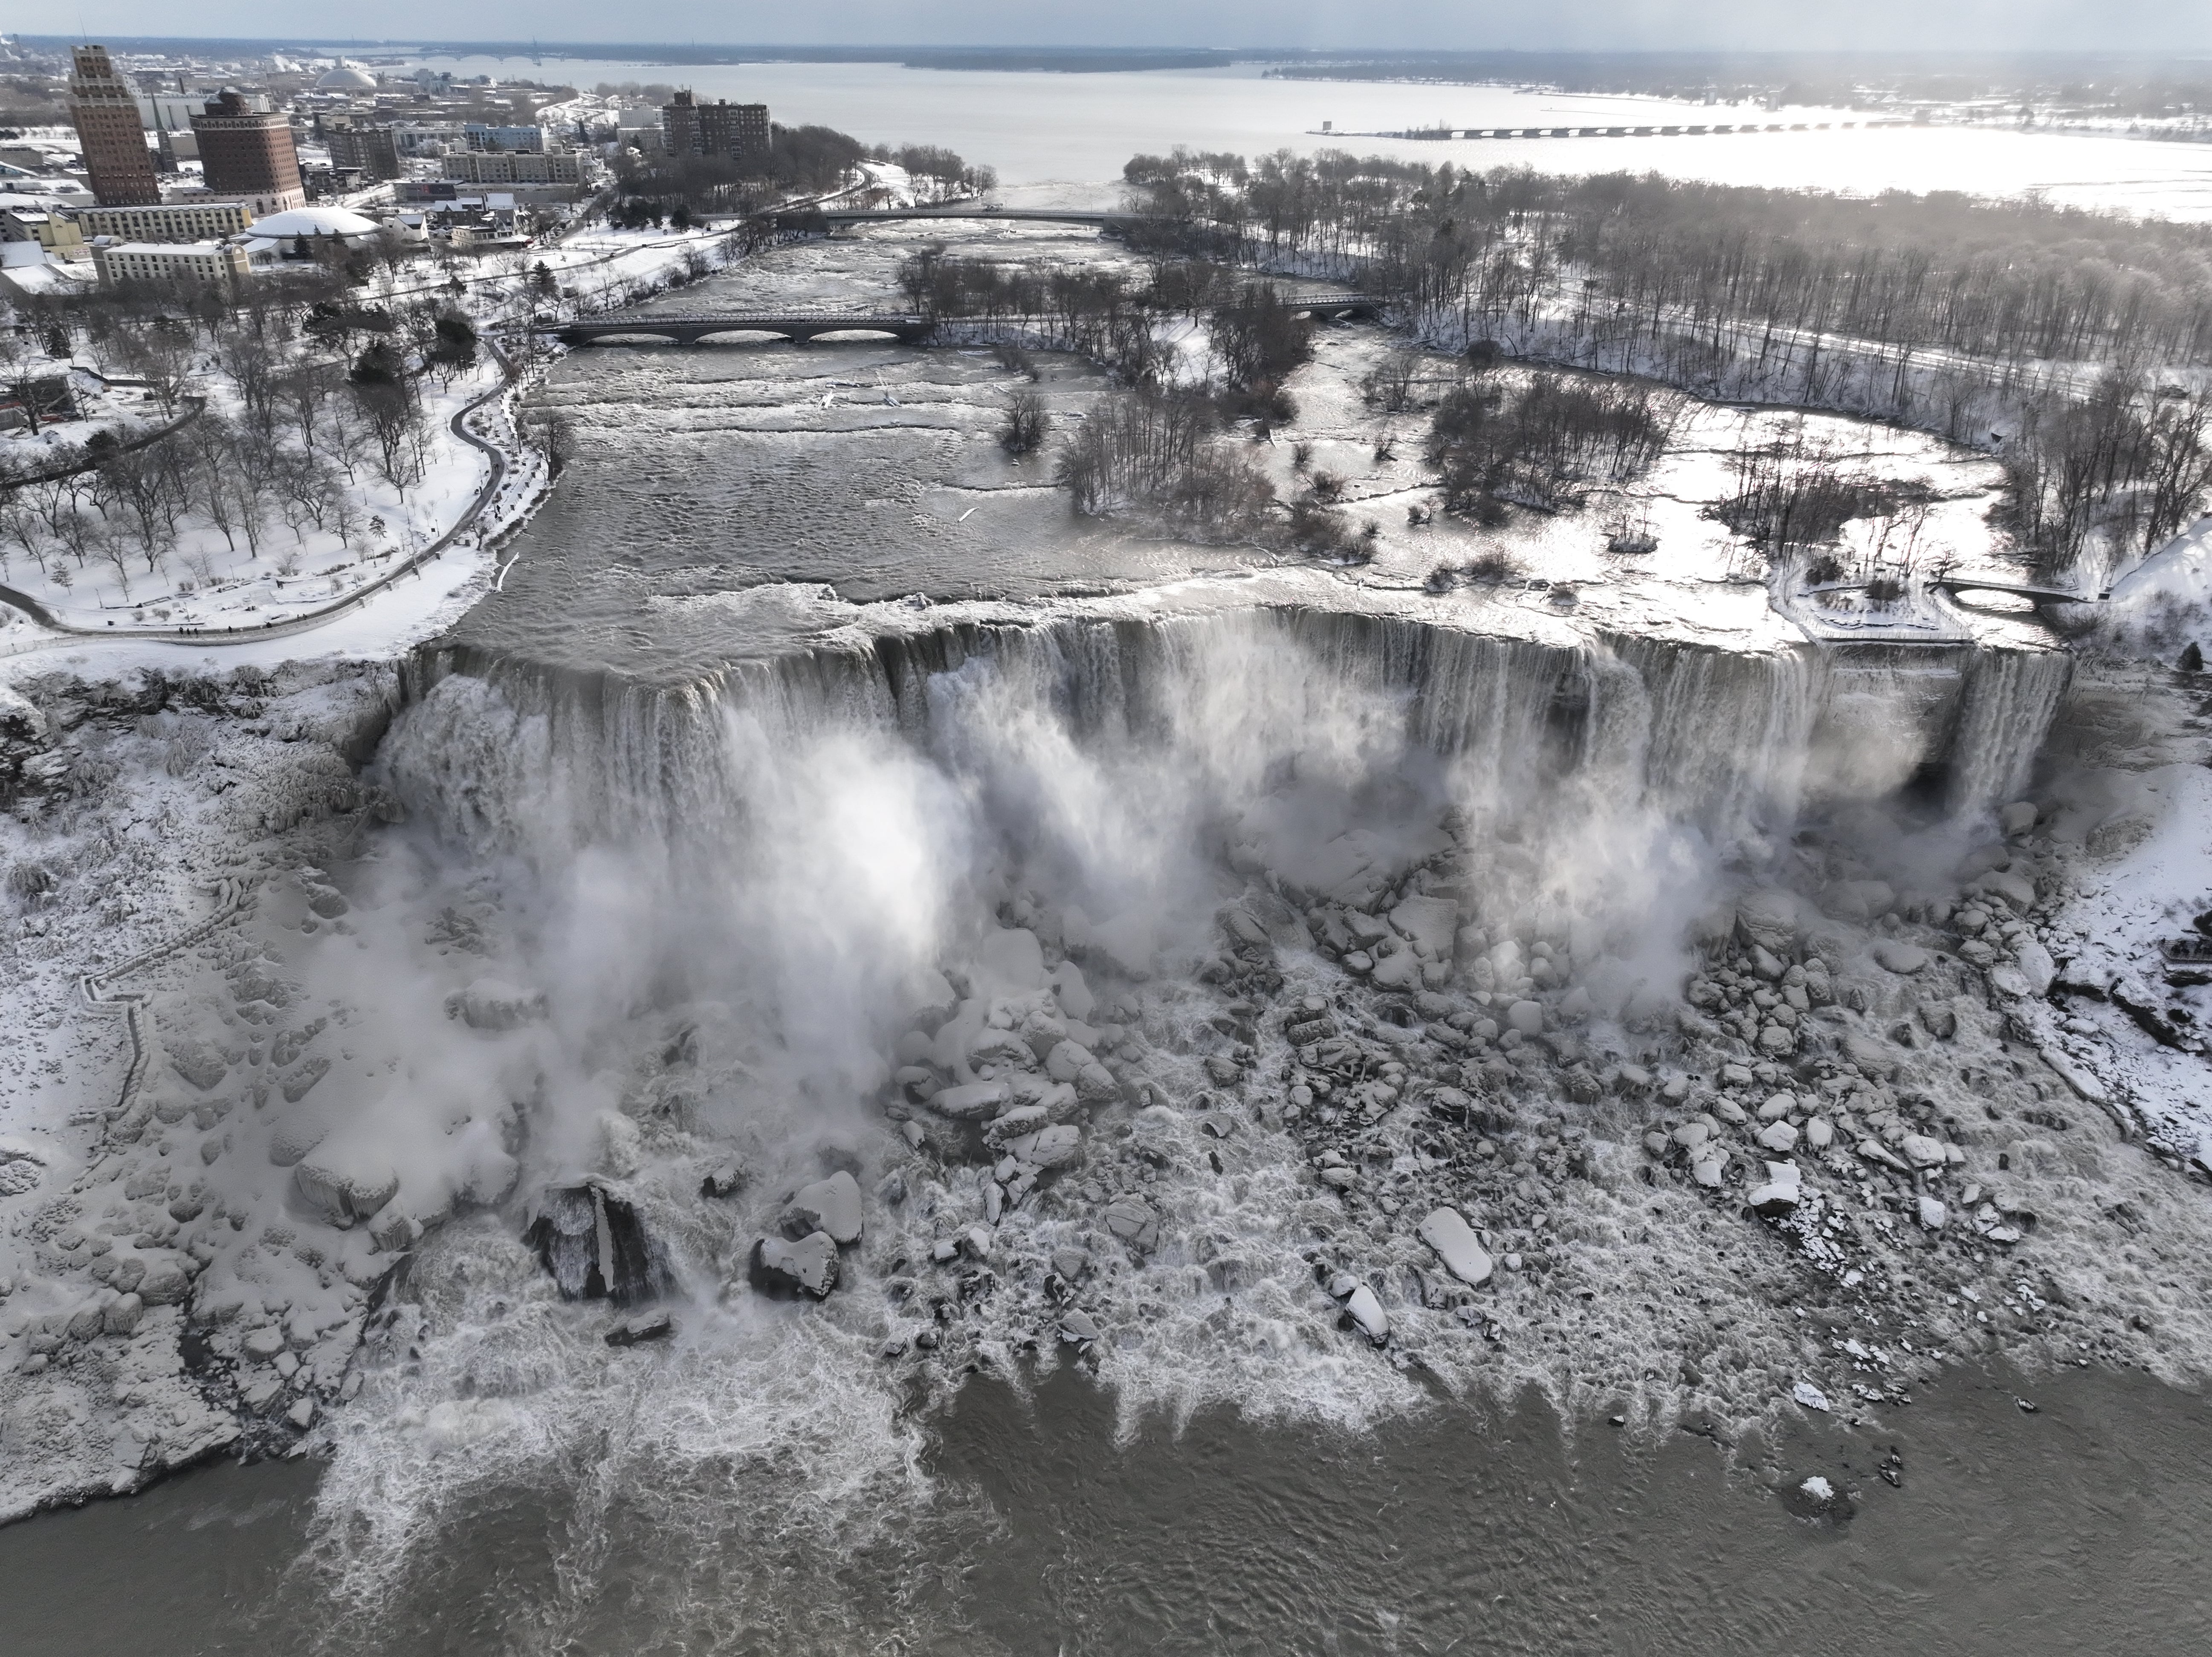 Niagara Falls treated tourists to a magical winter wonderland as it partially froze over during a massive winter storm.